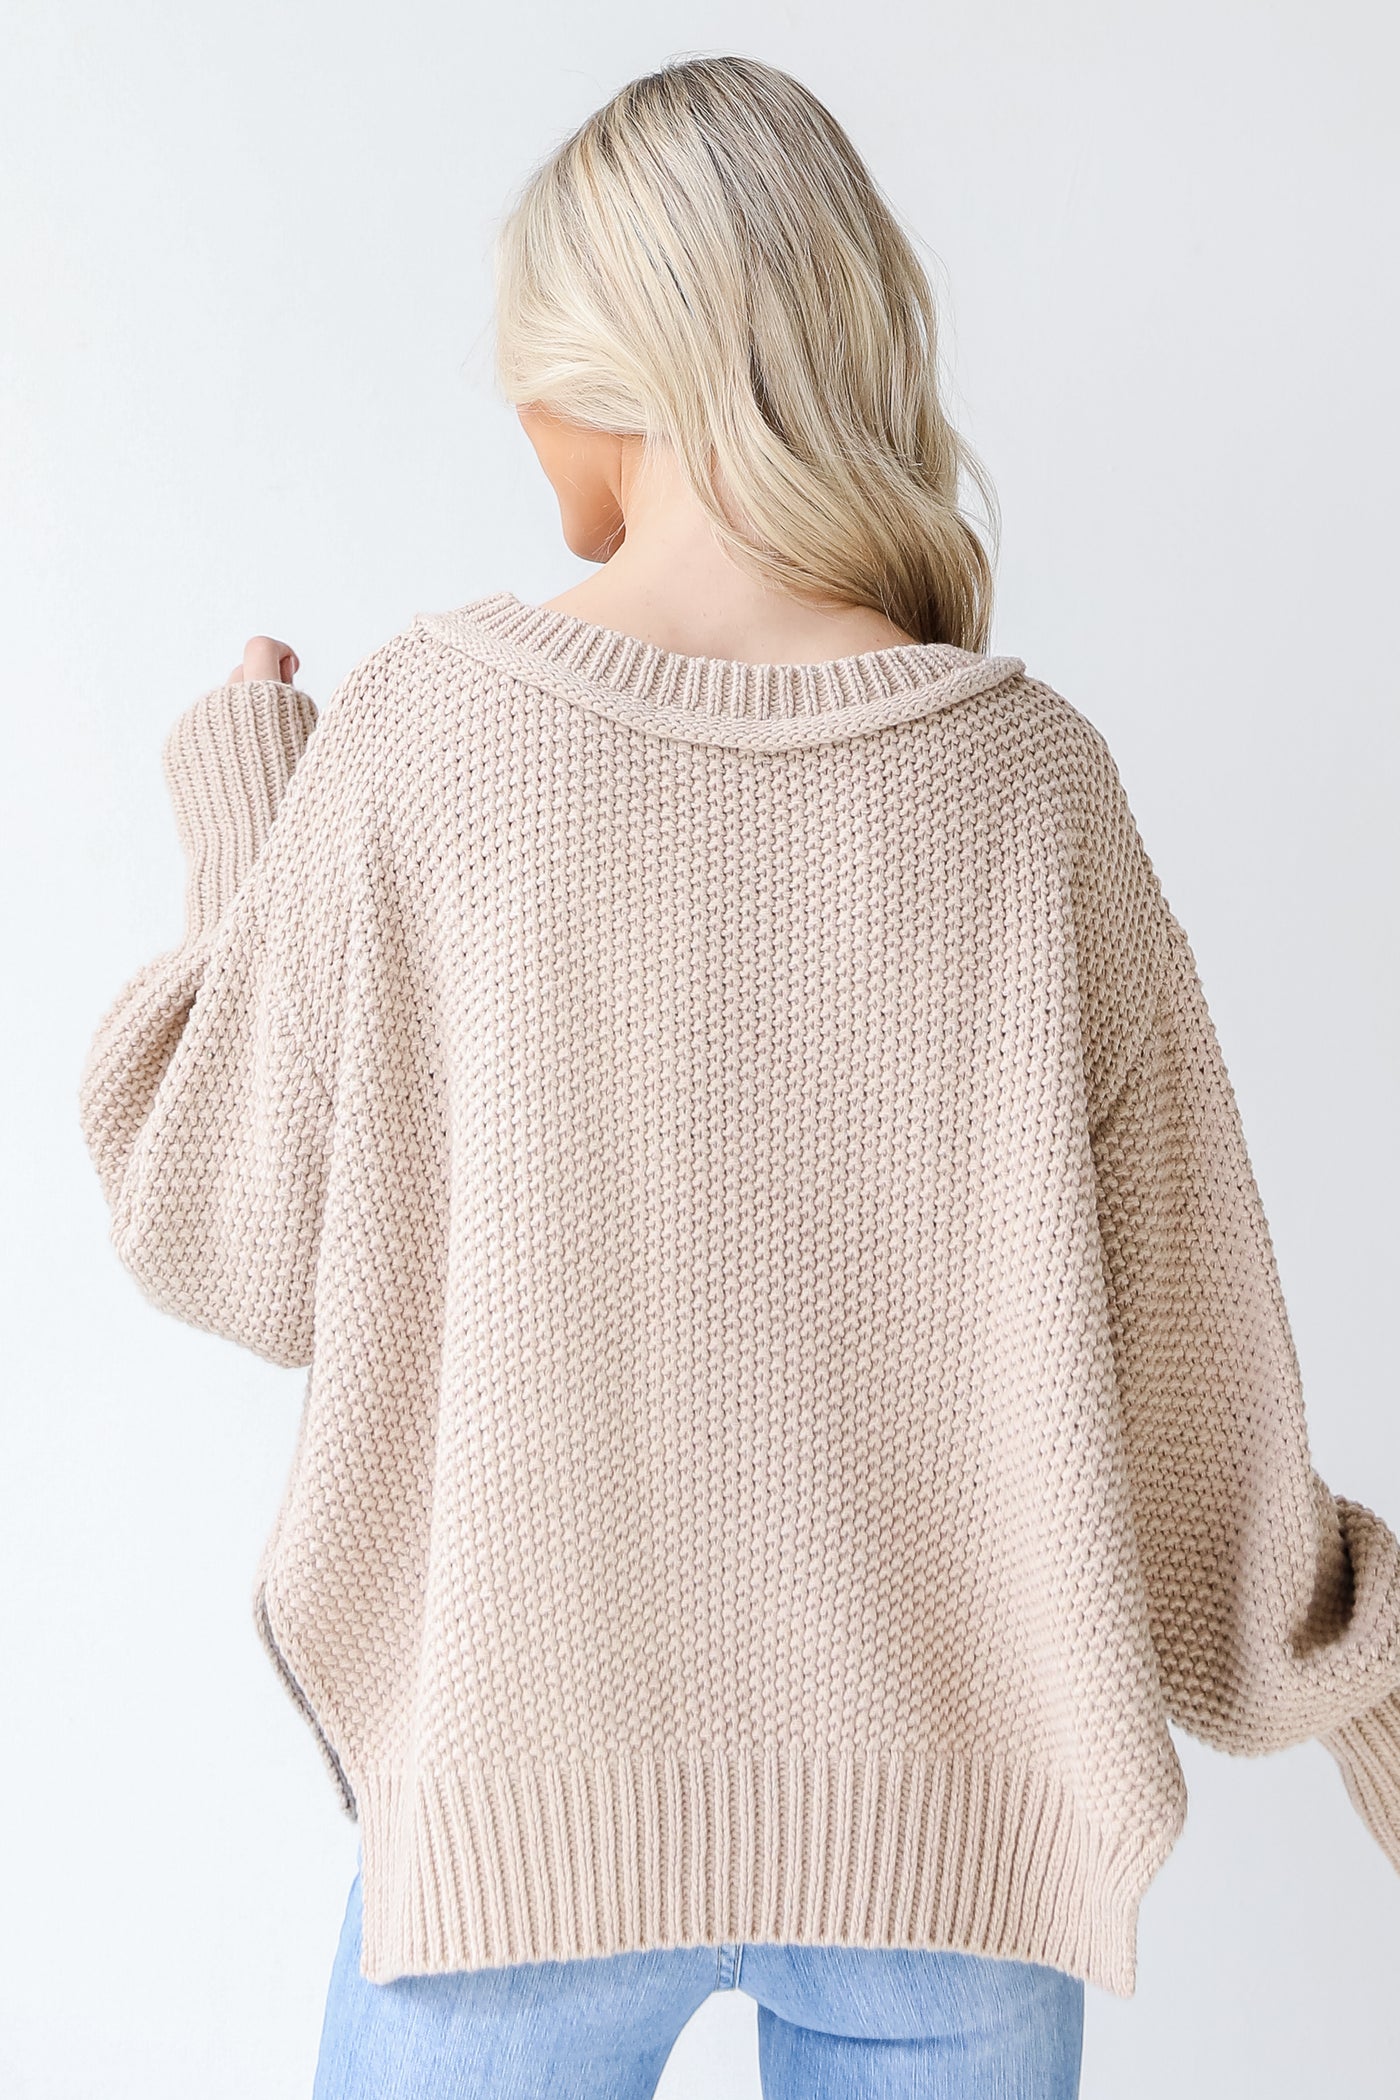 Sweater in taupe back view